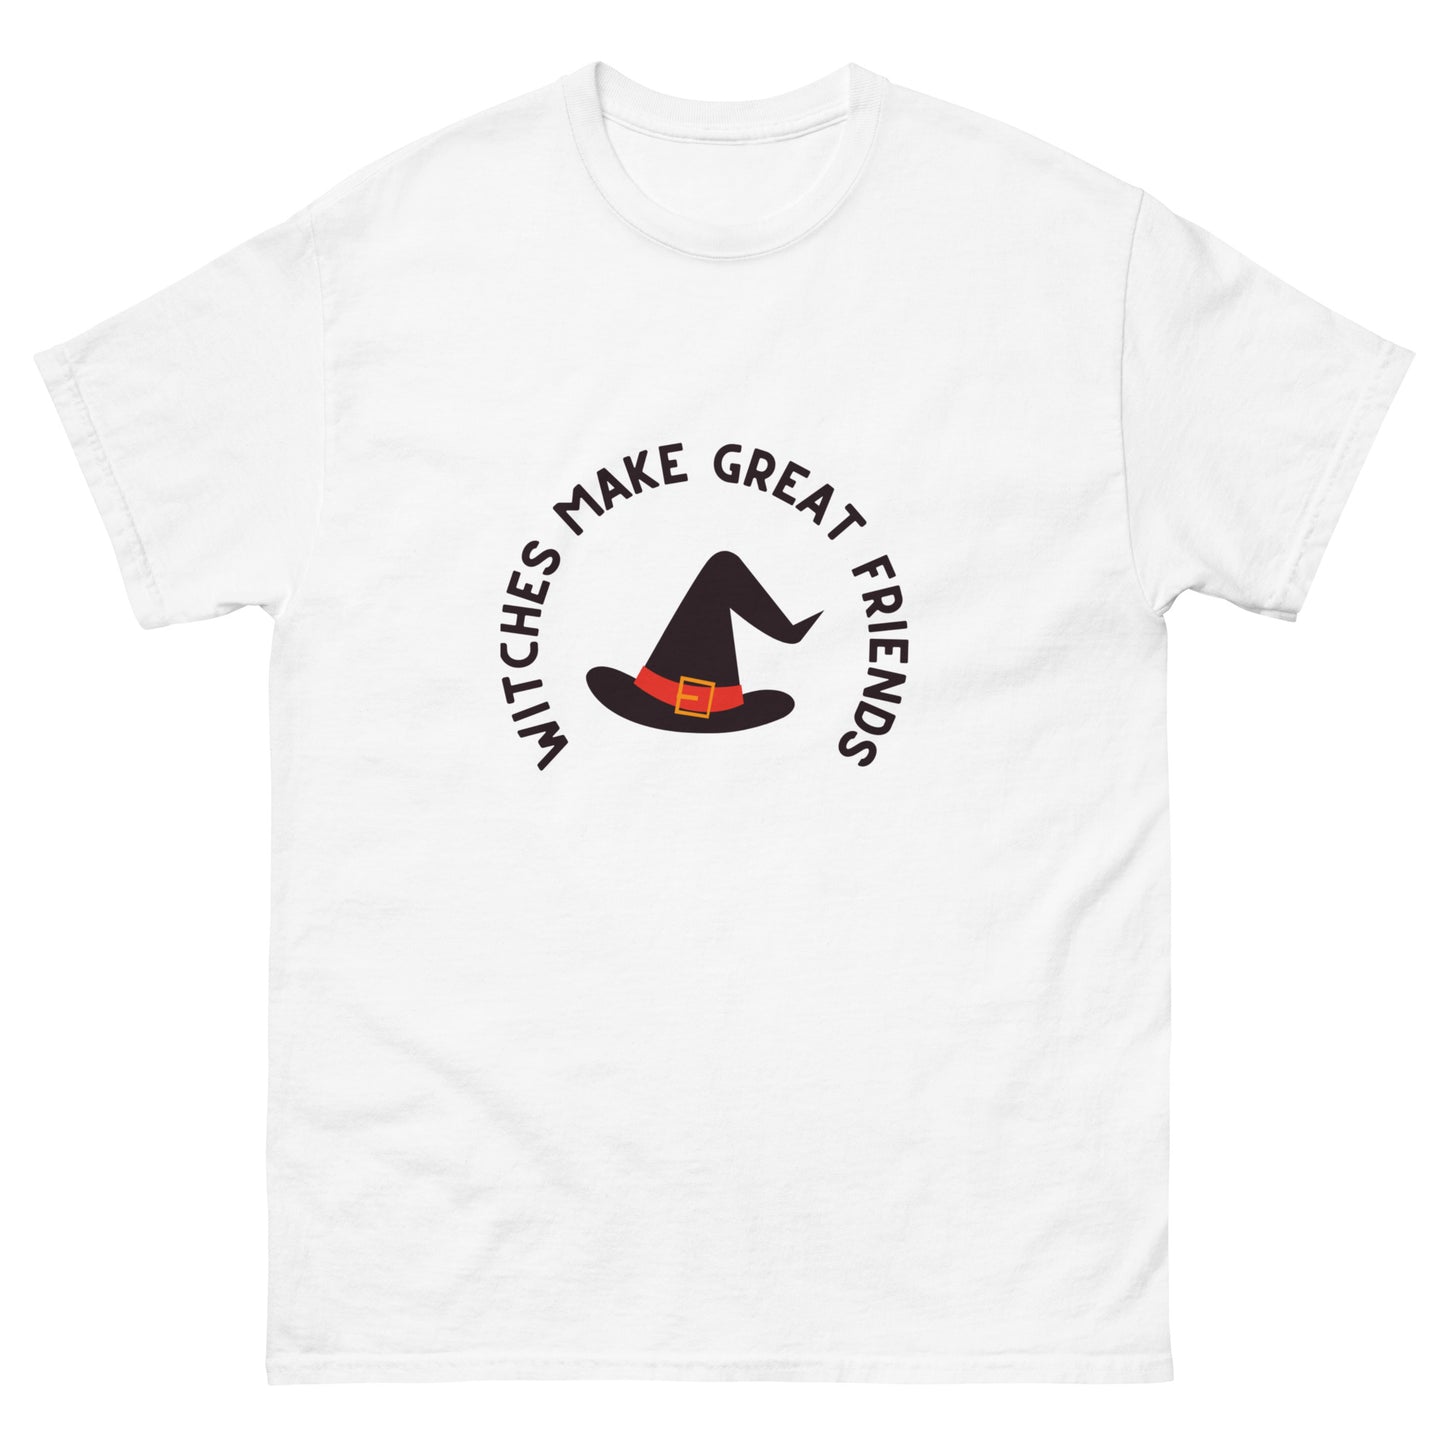 Witches Make Great Friends T-Shirt - The Good Life Vibe